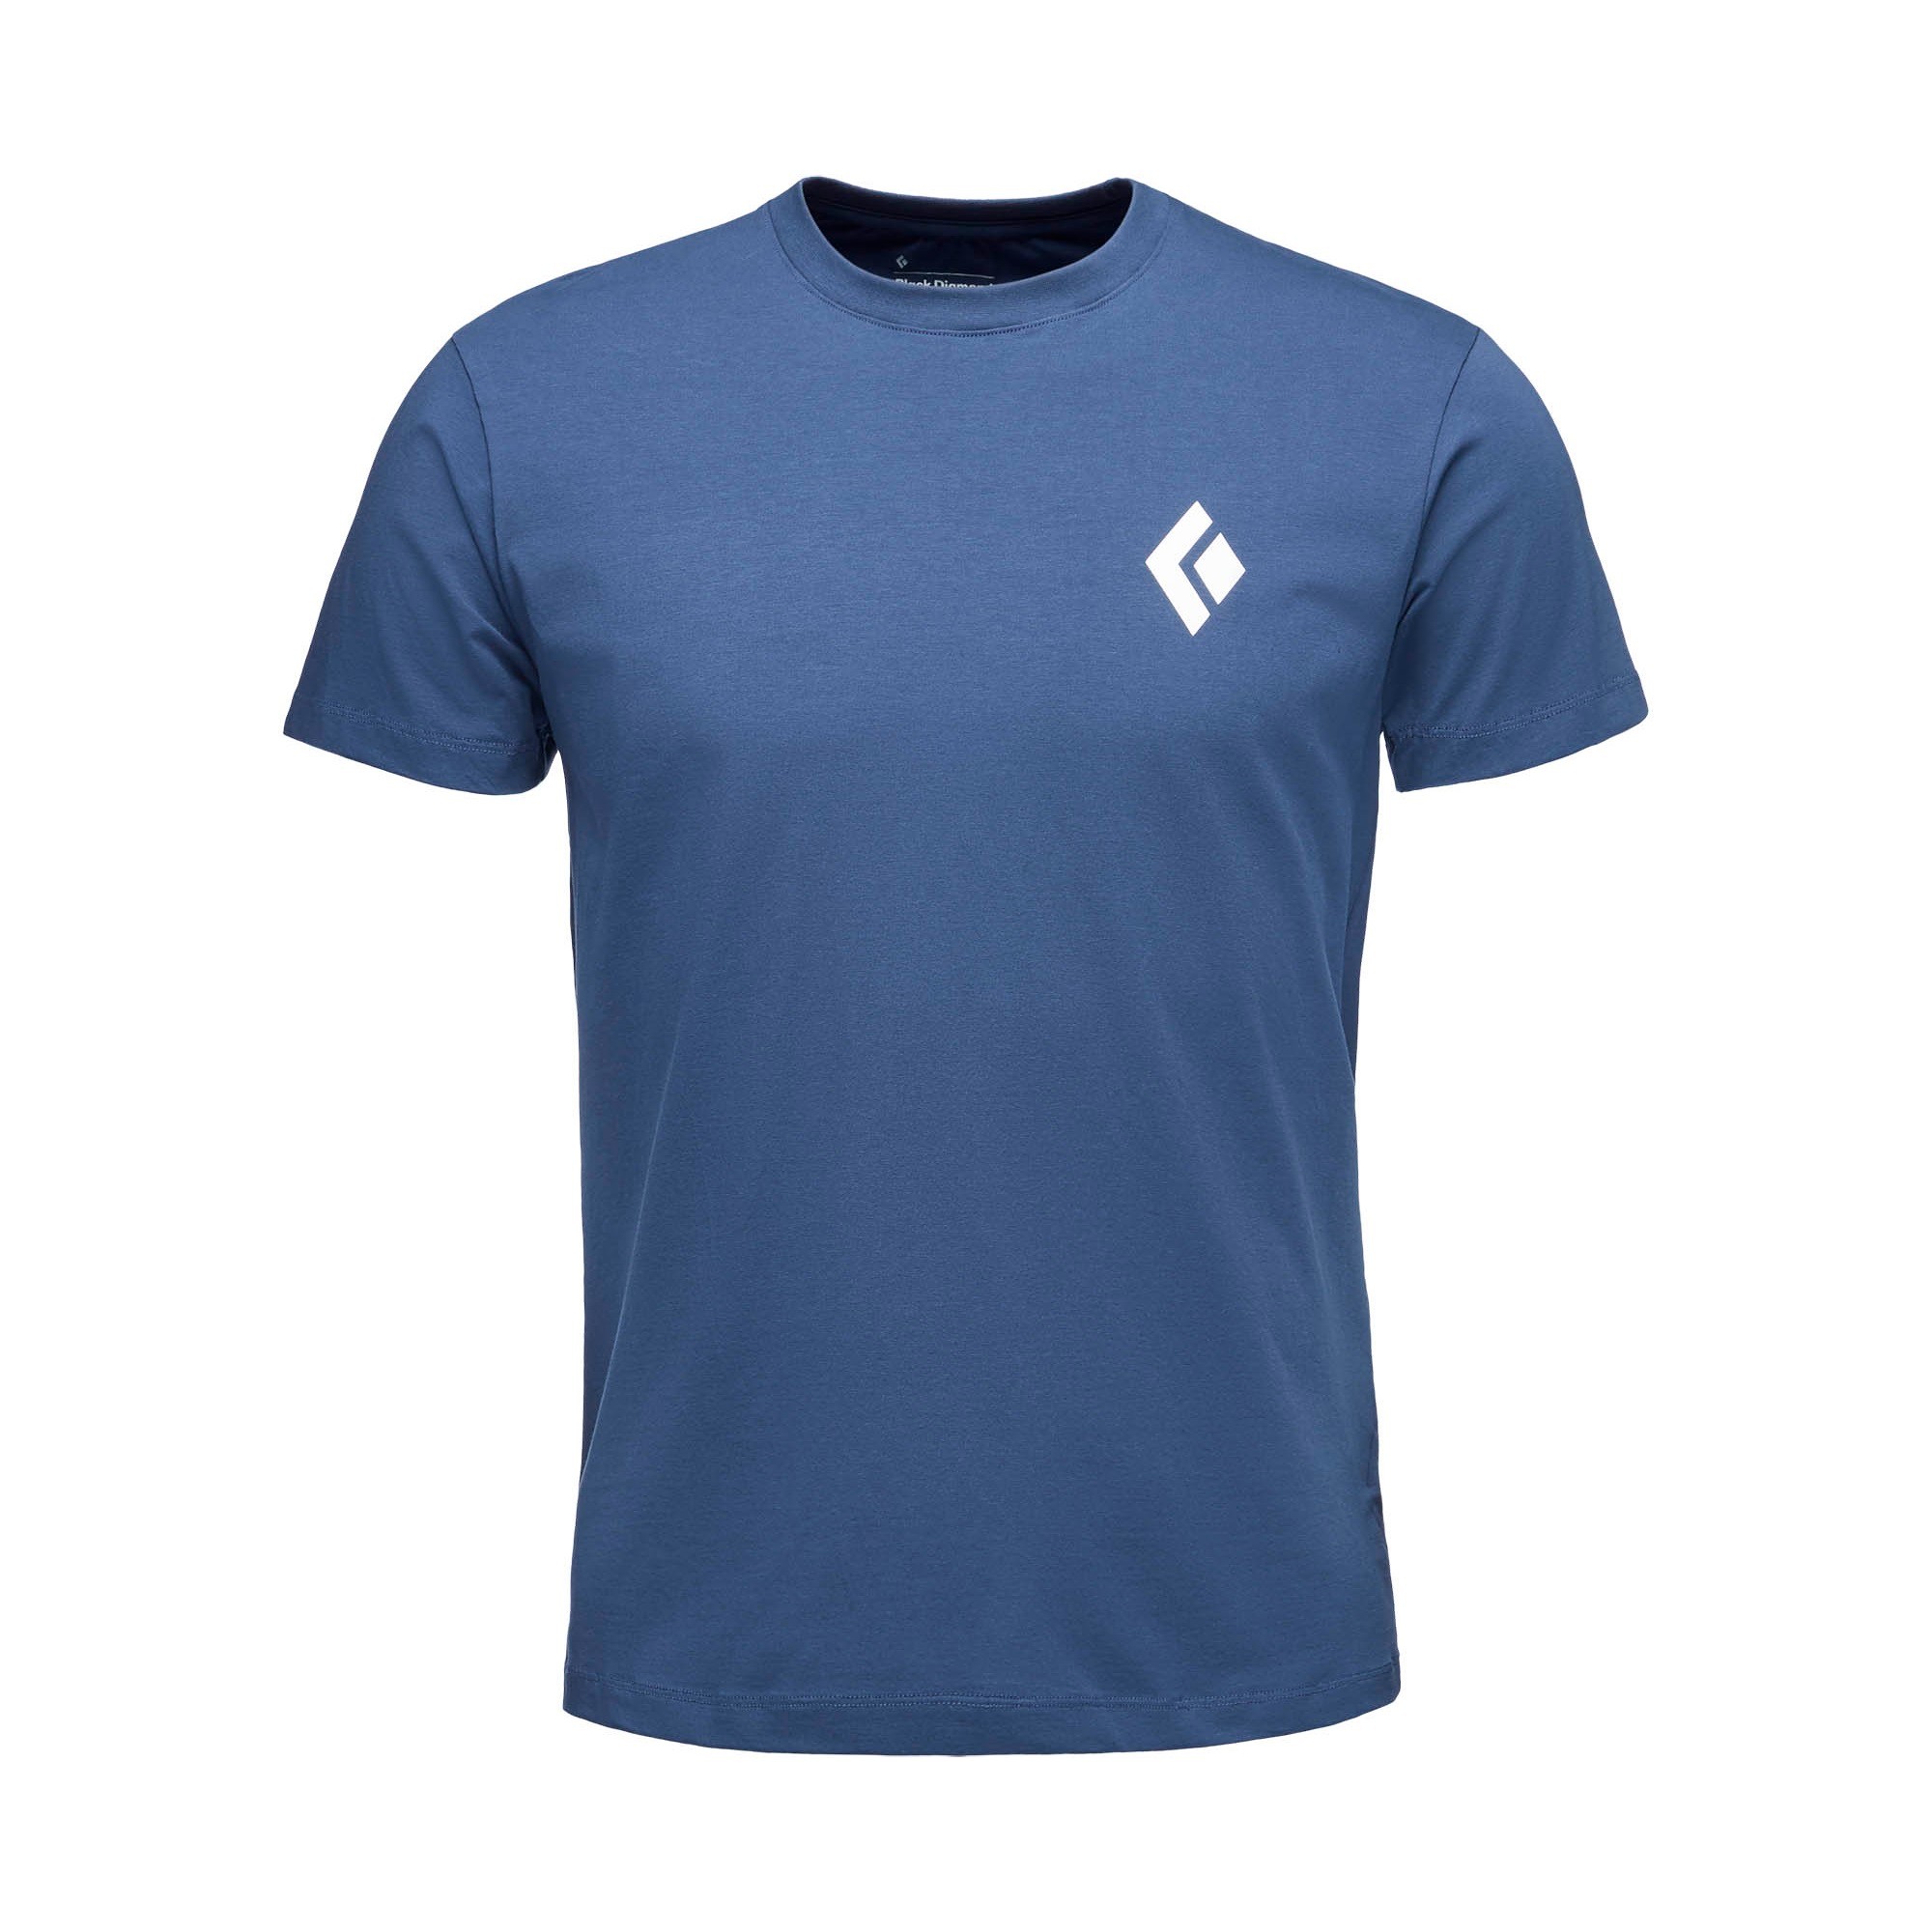 Men’s SS Tee Equipment For Alpinist Ink Blue